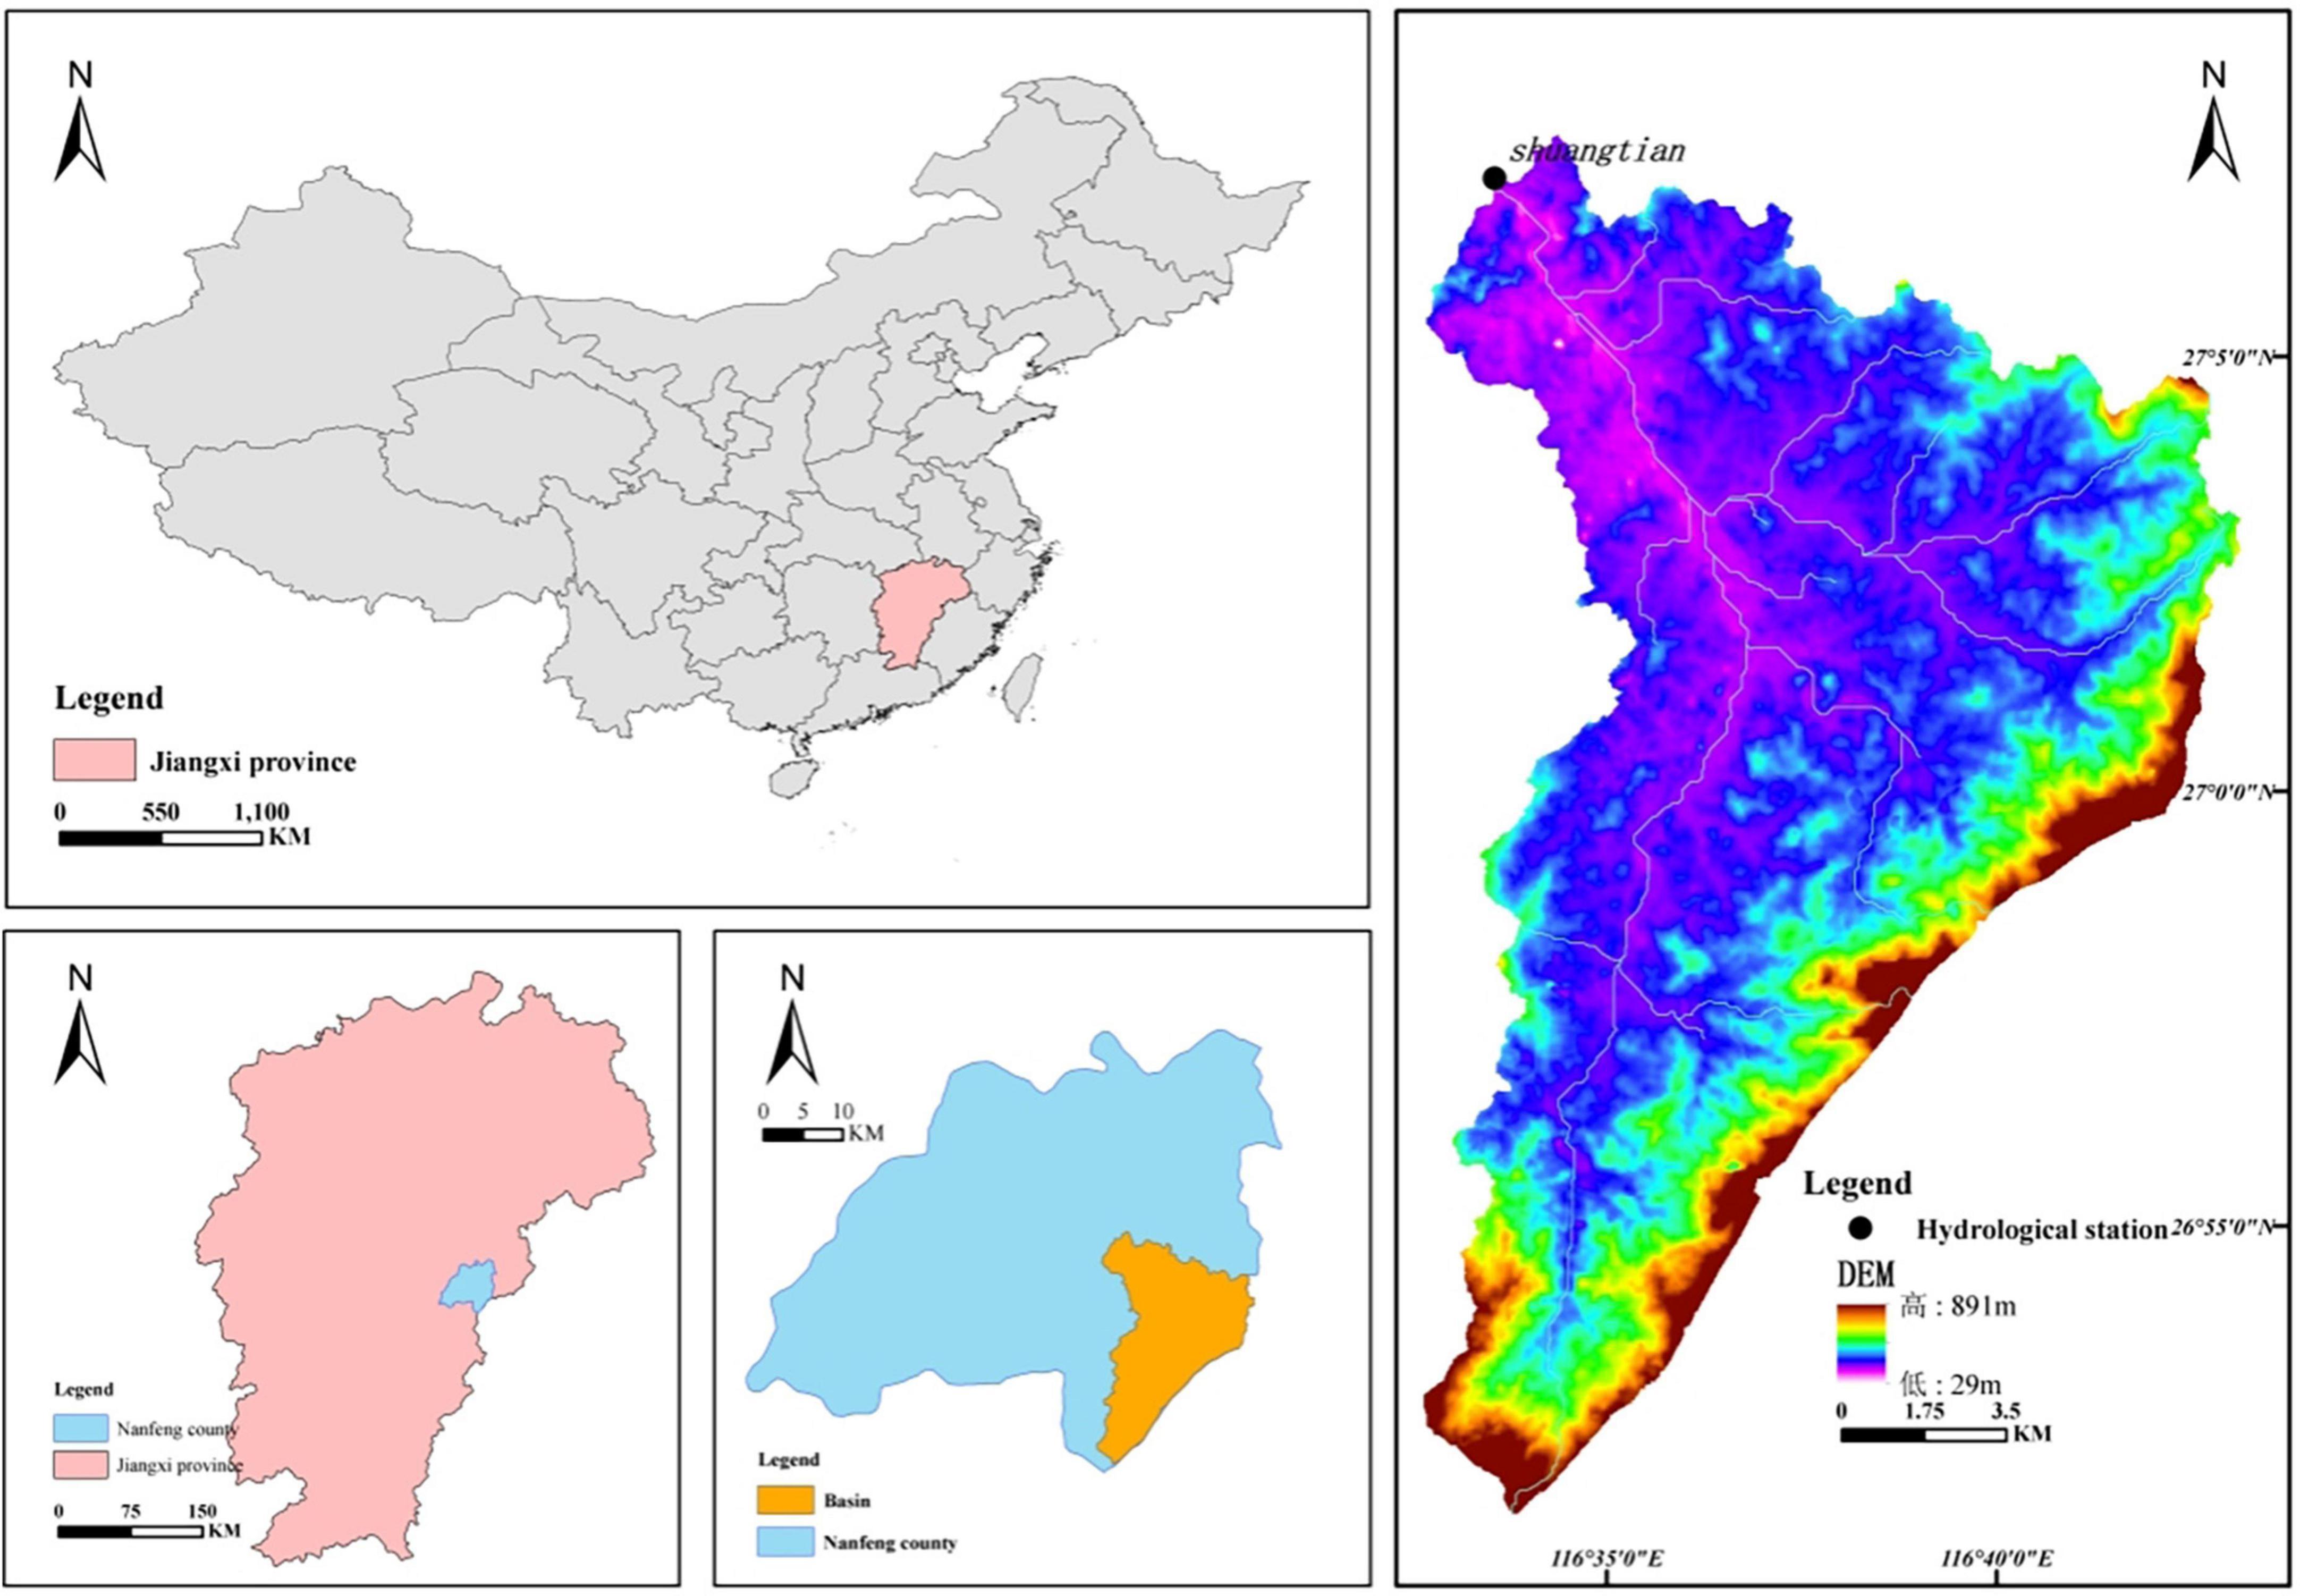 Impacts of climate change and fruit tree expansion on key hydrological components at different spatial scales